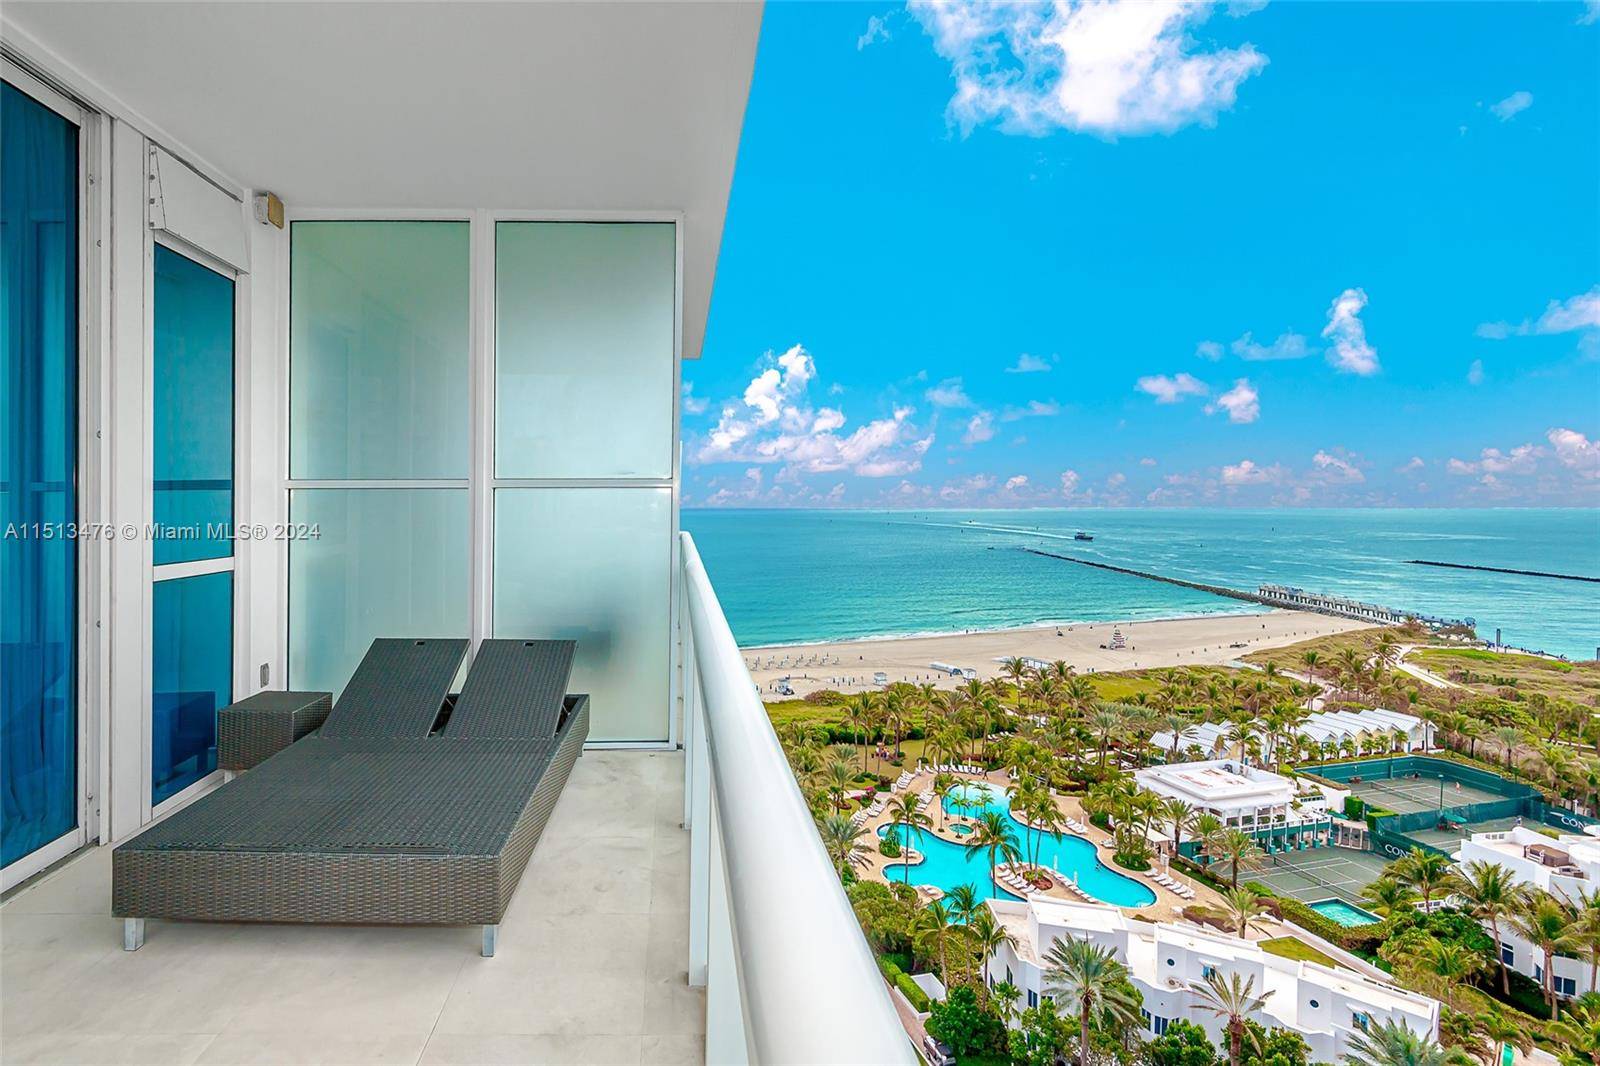 Rarely available, this elegant home has an impressive layout and breathtaking views.